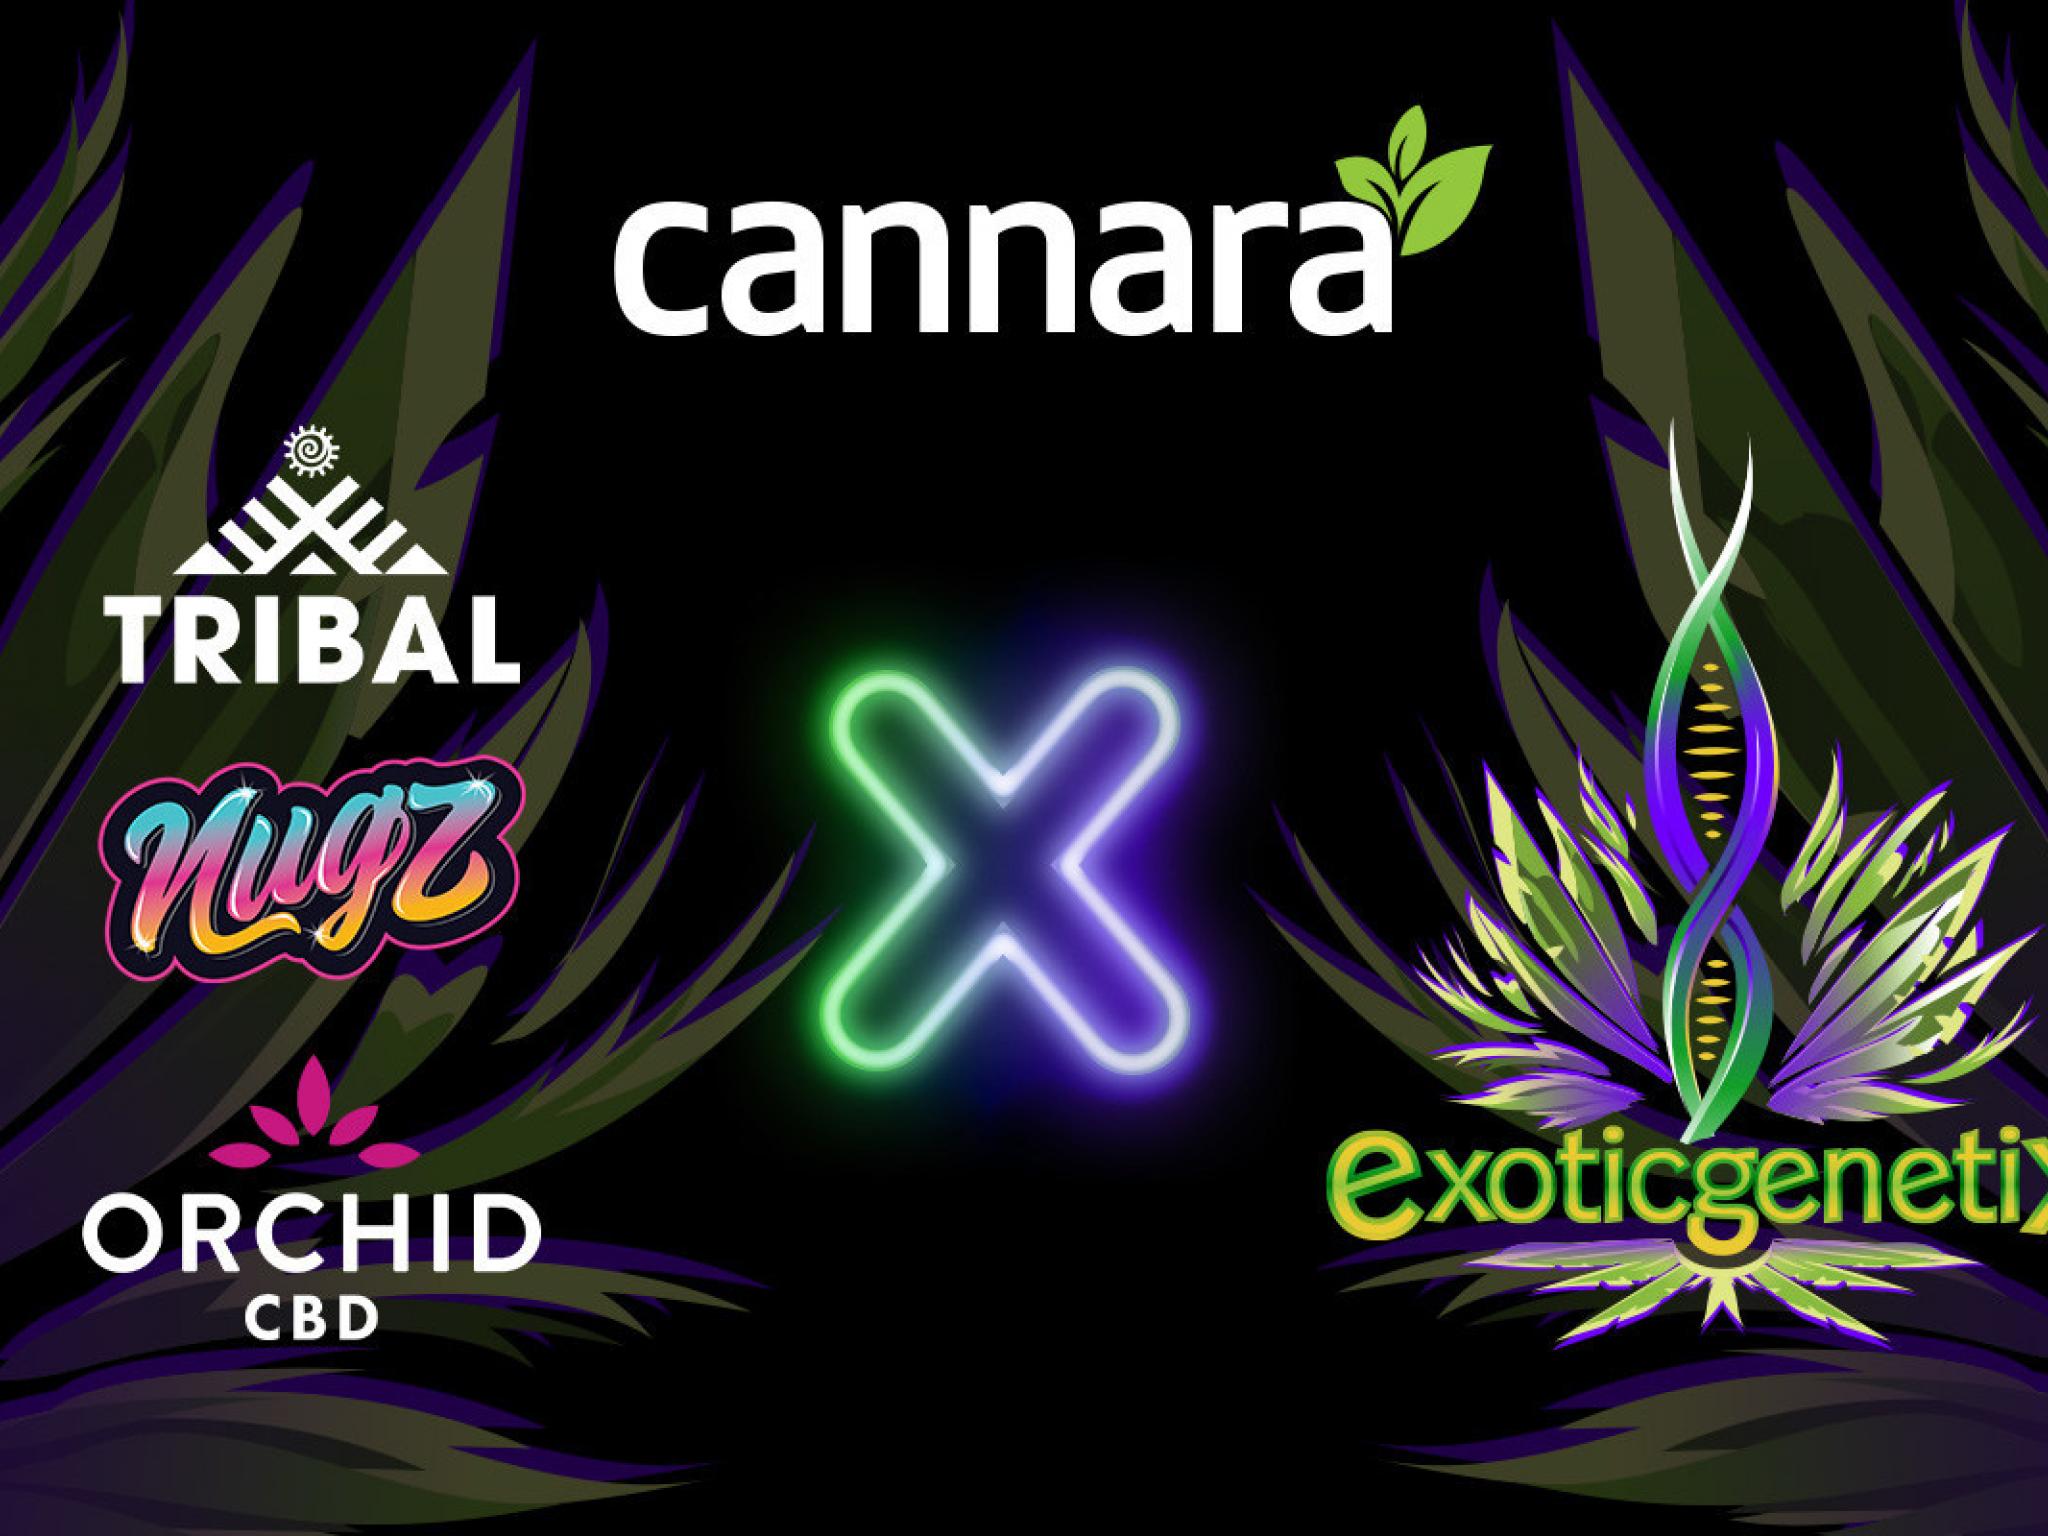  cannara-biotech-signs-an-exclusive-brand-partnership-with-exotic-genetix-in-canada 